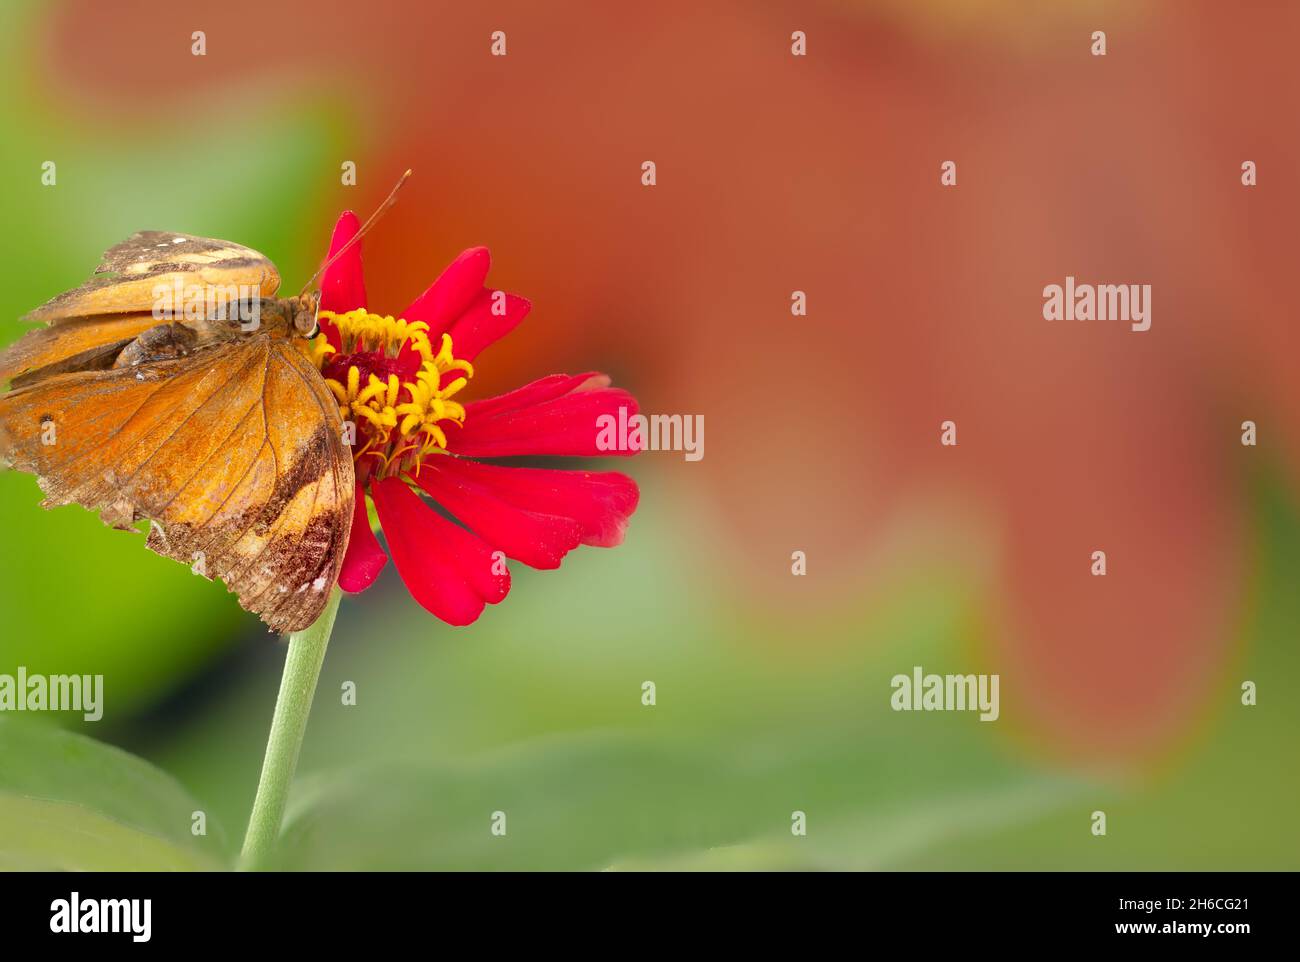 A brown butterfly perched on a red zinnia flower, has a blurred red flower background and warm sunlight, copy space Stock Photo